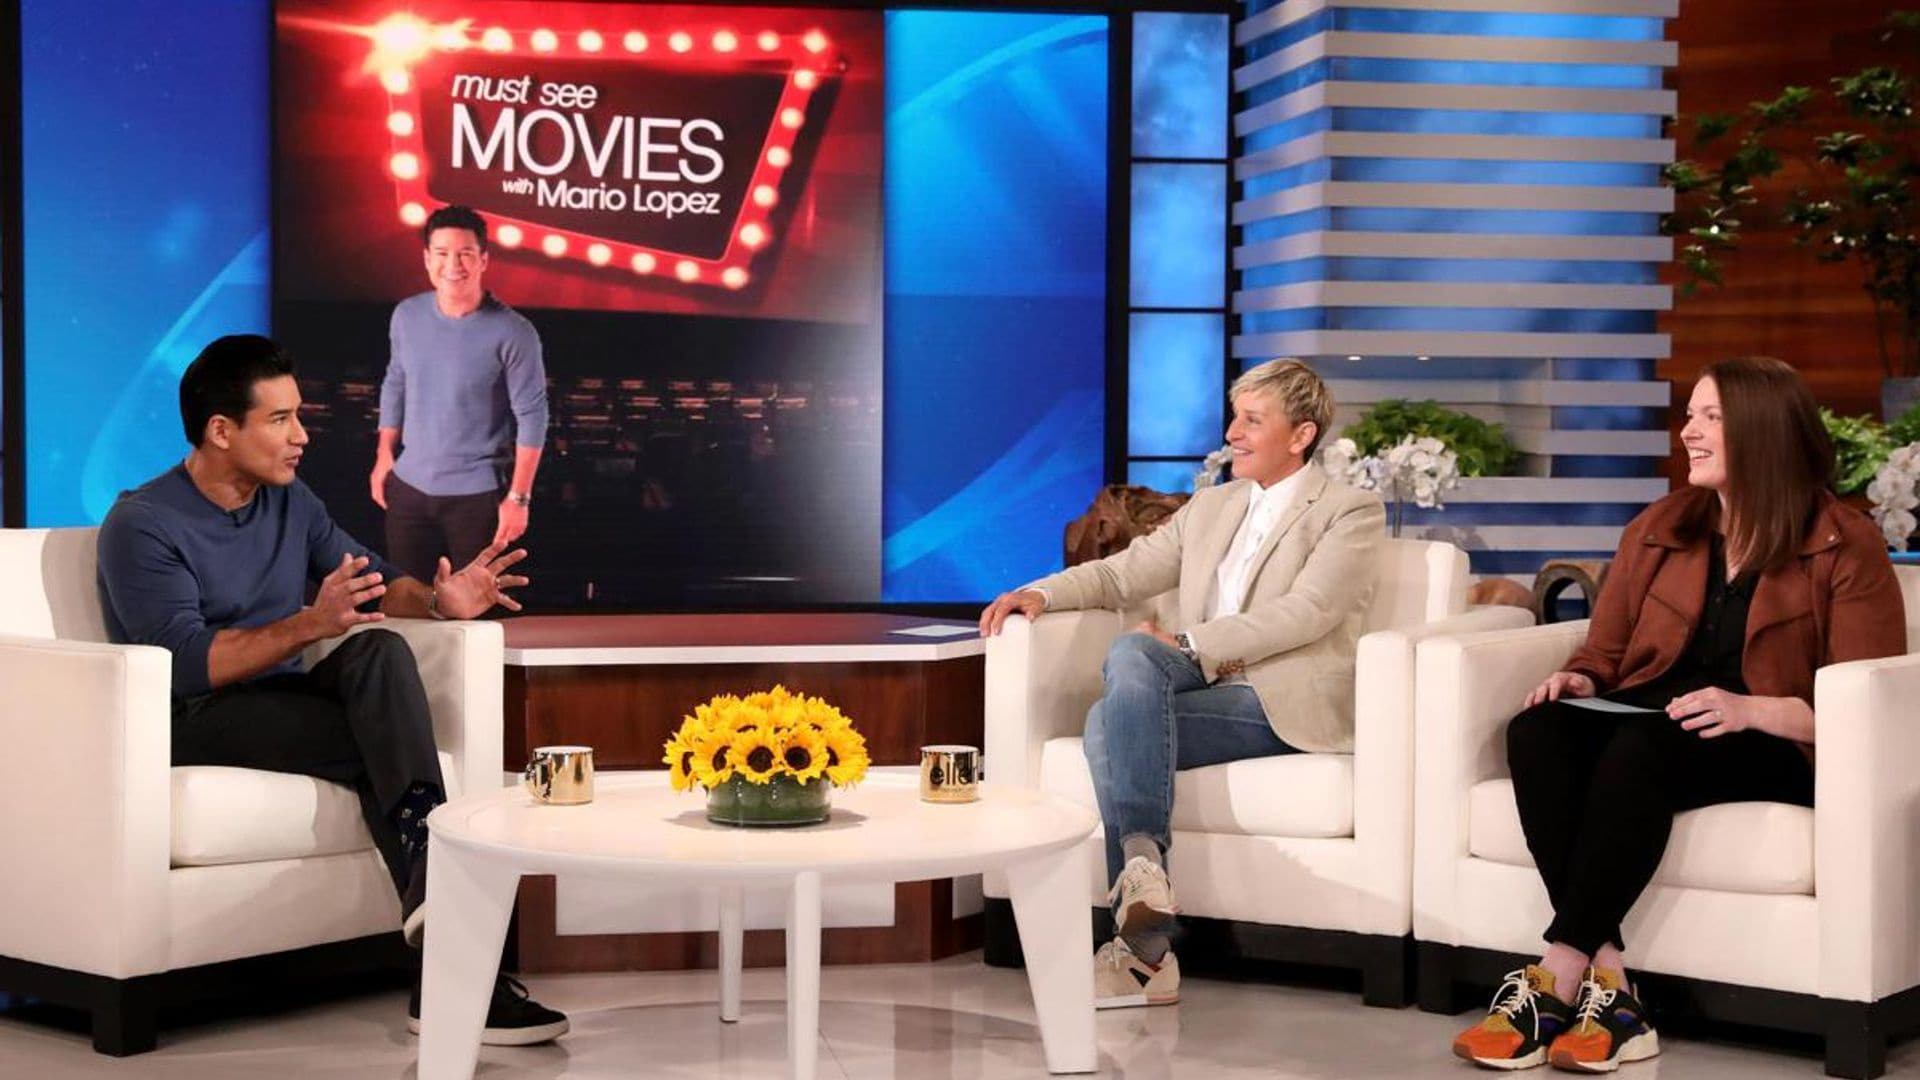 Mario Lopez talks about the time he and Ellen DeGeneres made out